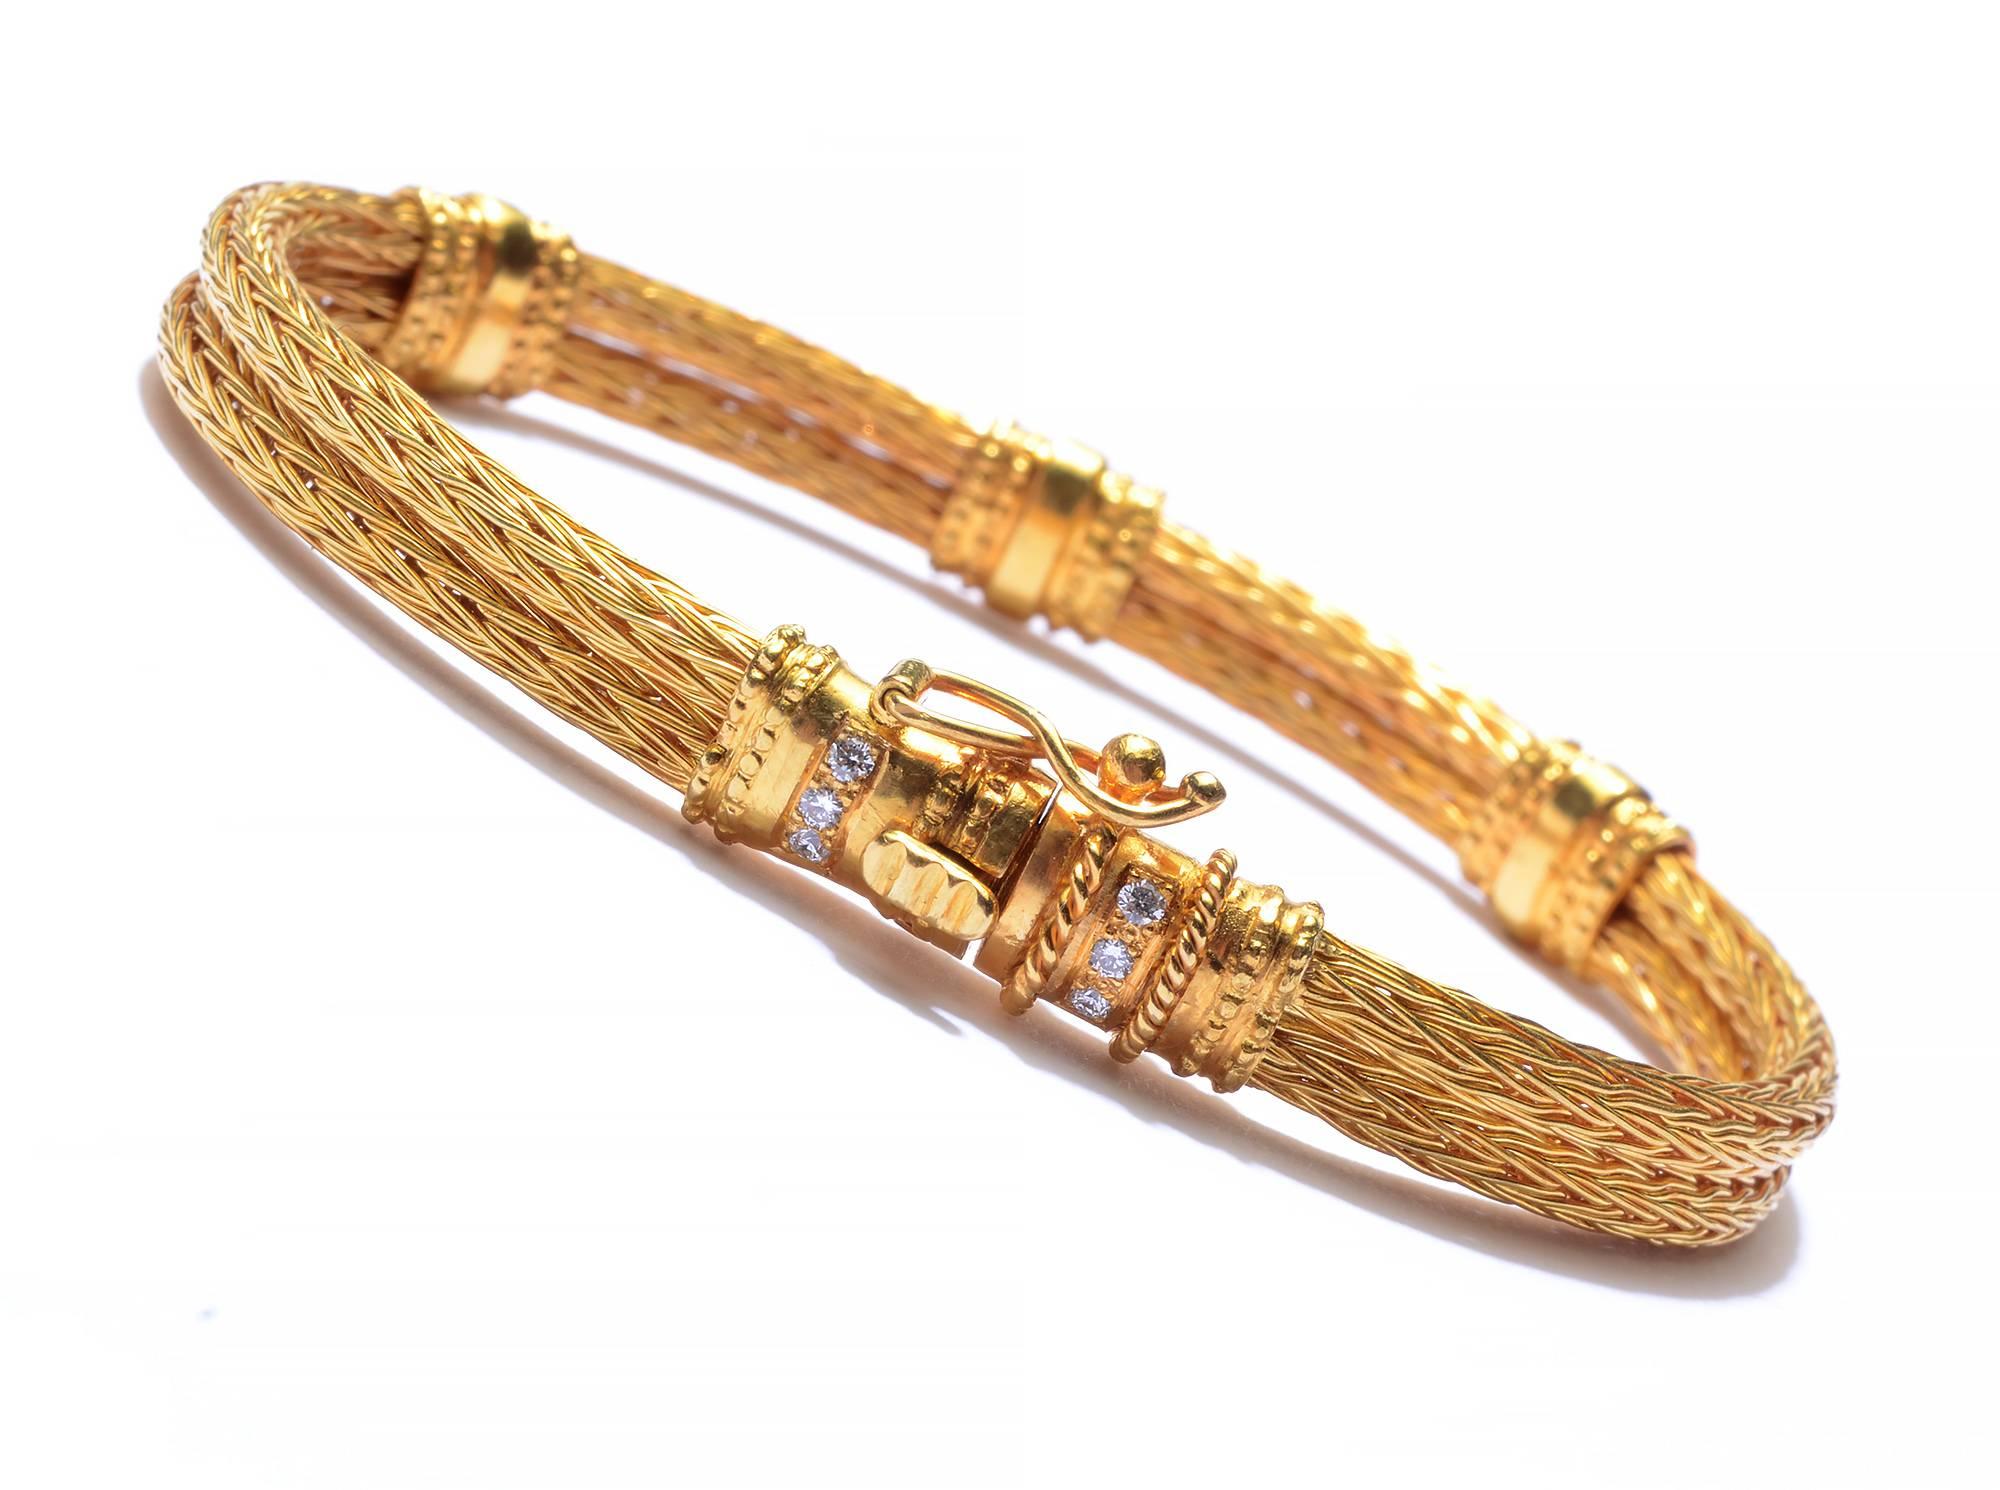 This 18 karat gold bracelet by Ilias laLaounis is elegant and understated. Two rows of foxtail woven gold are joined by five delicately textured bands of gold with diamonds. The bracelet measures 7 1/4